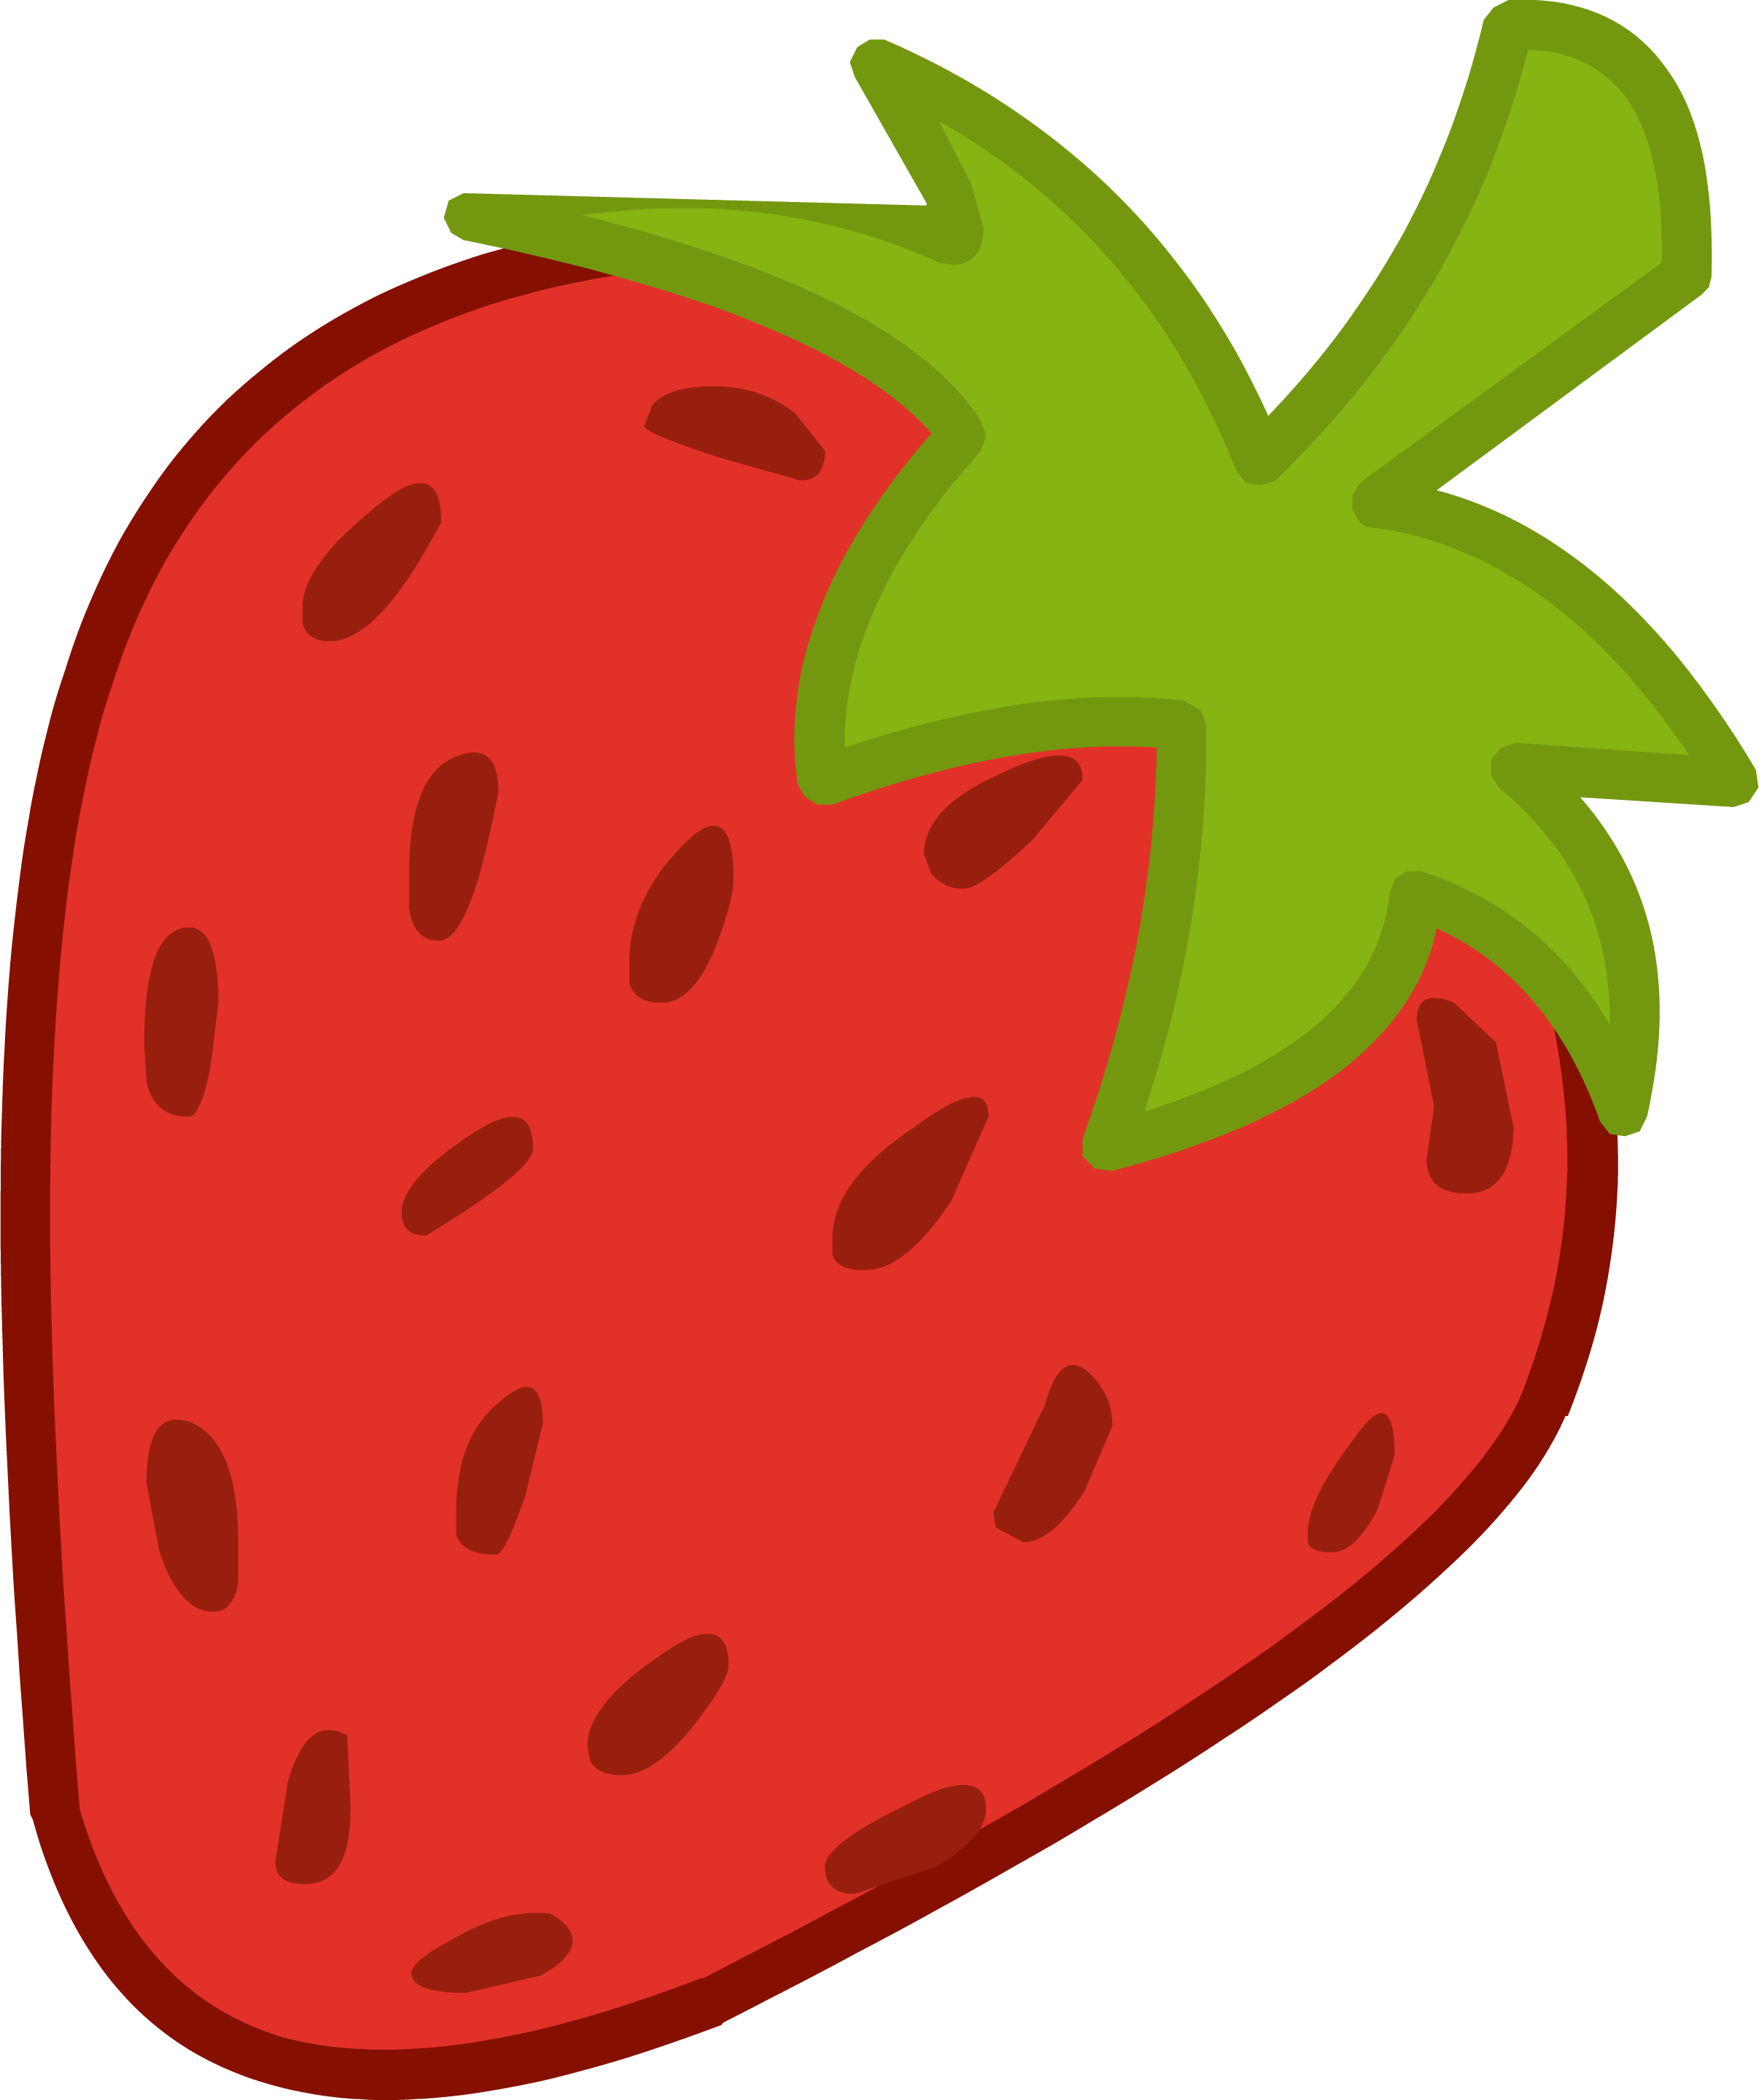 red strawberry clipart - photo #10